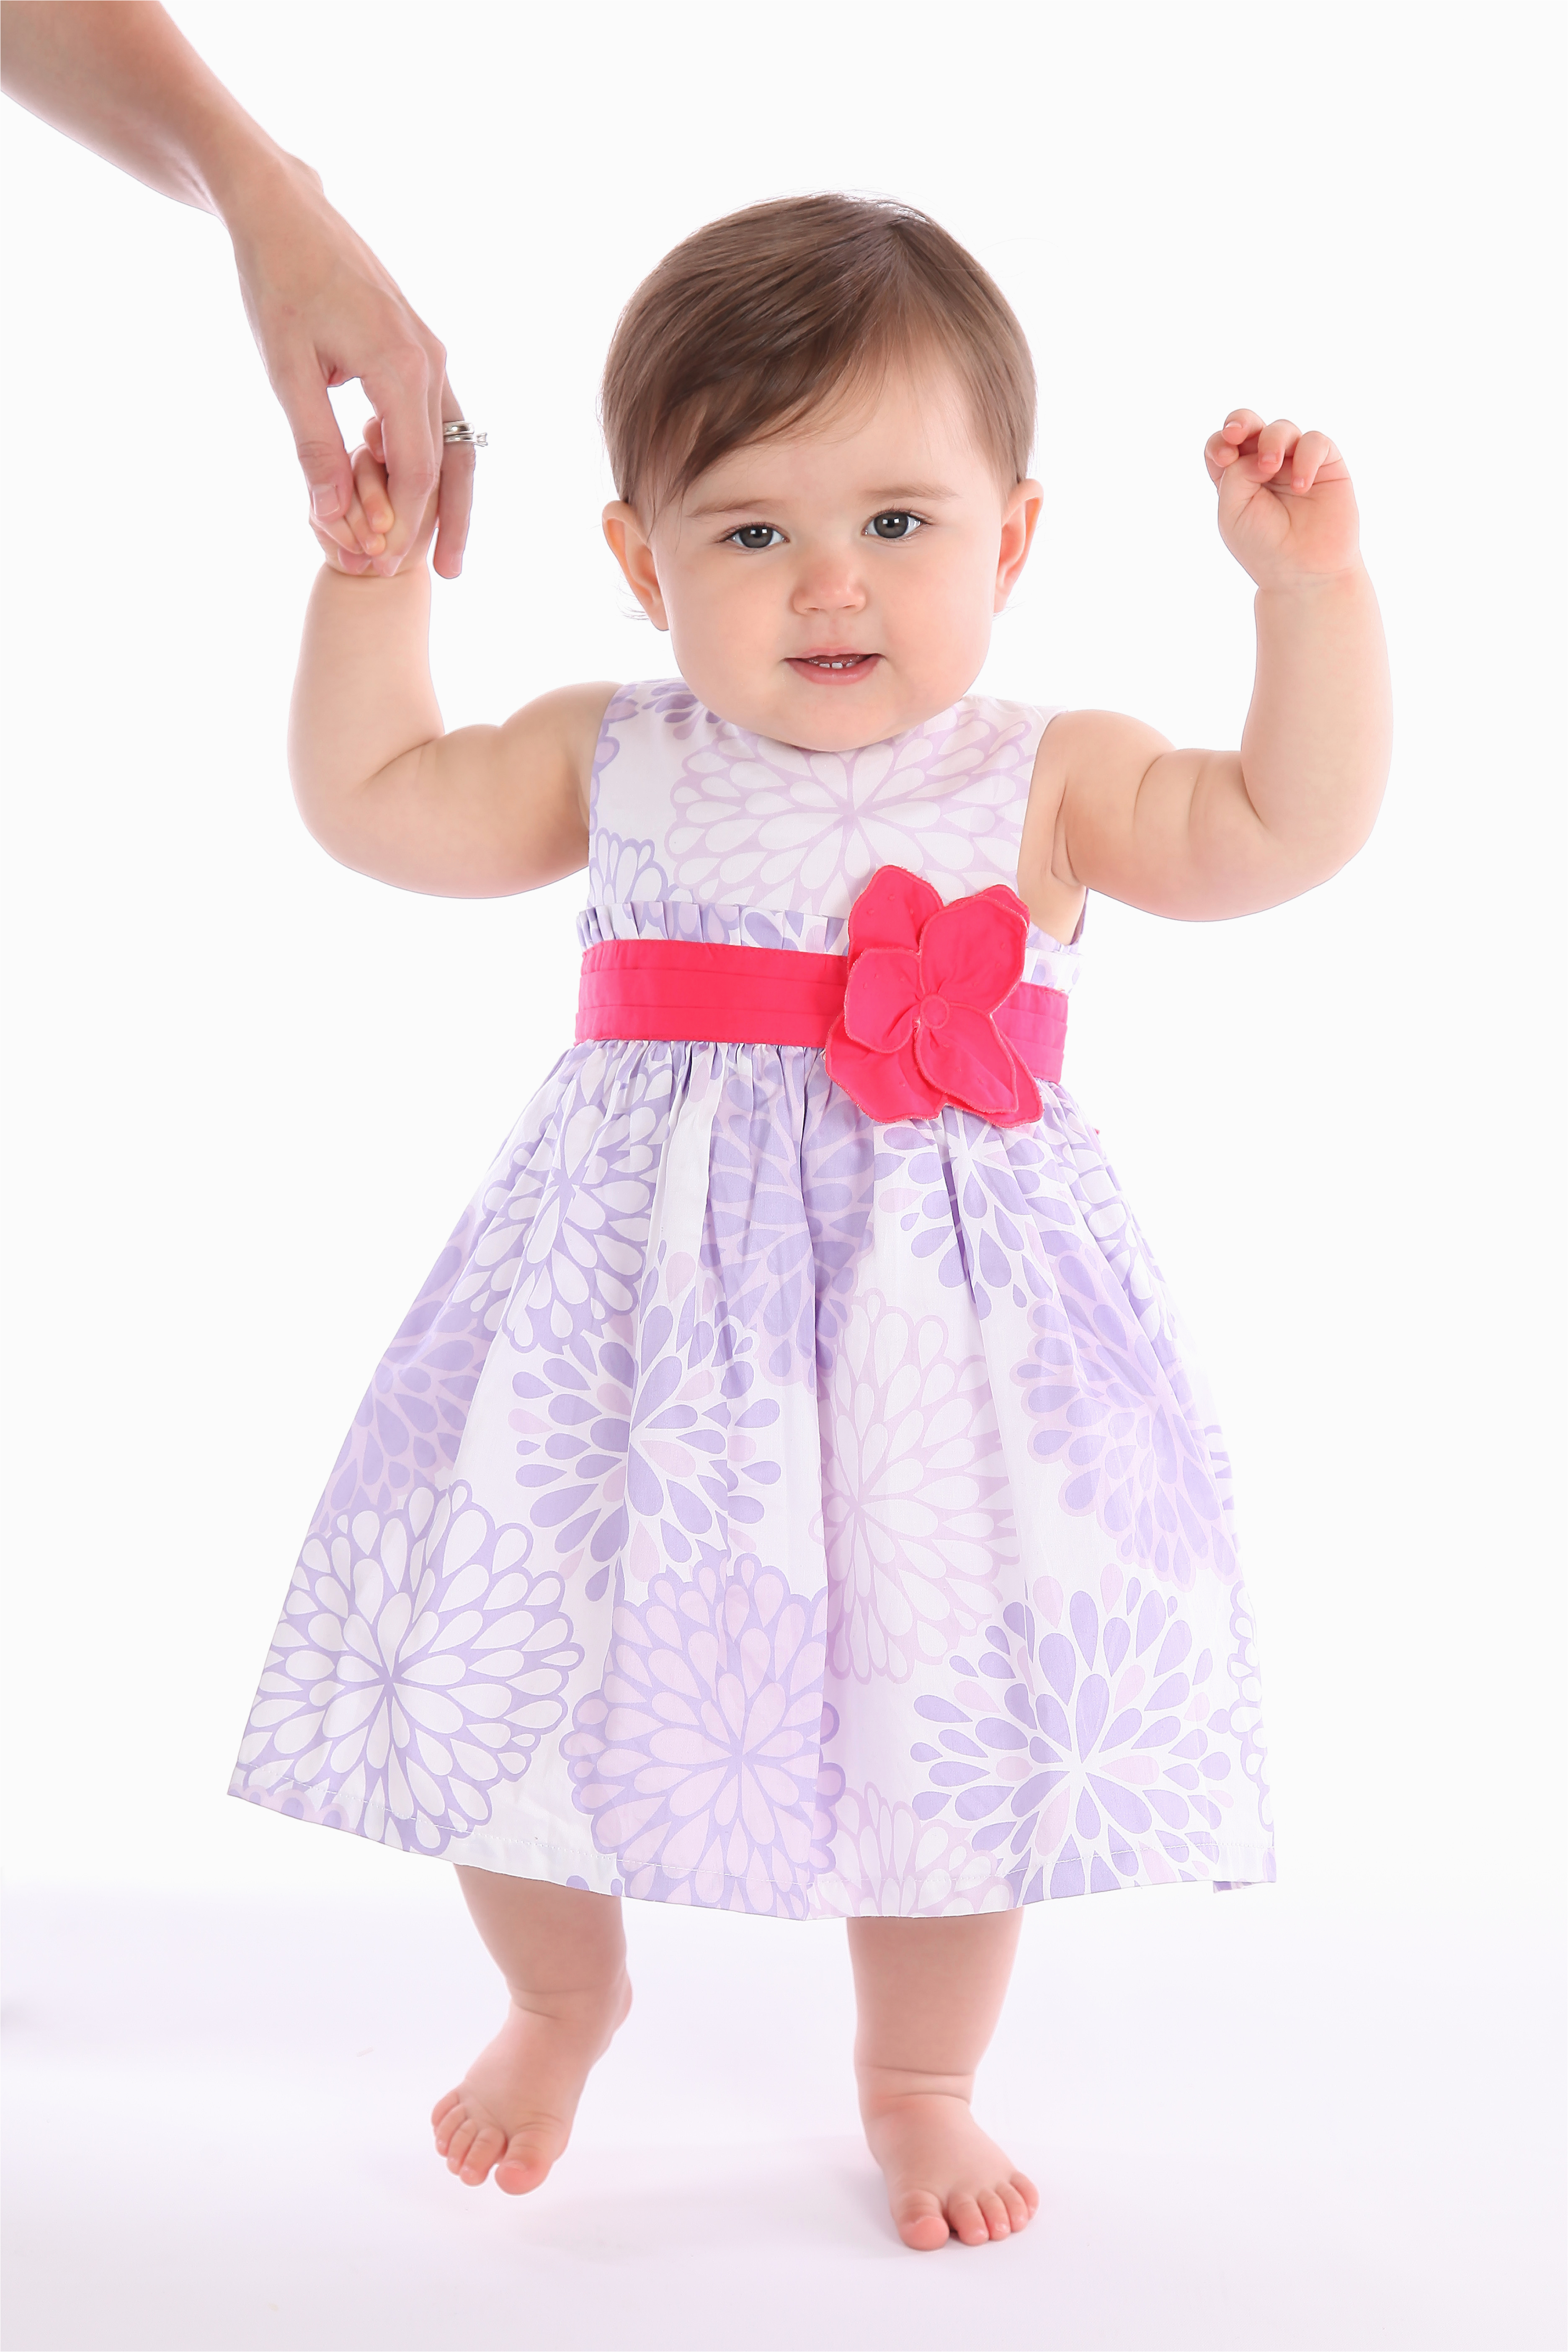 birthday dresses collection for baby girl india 1 year old